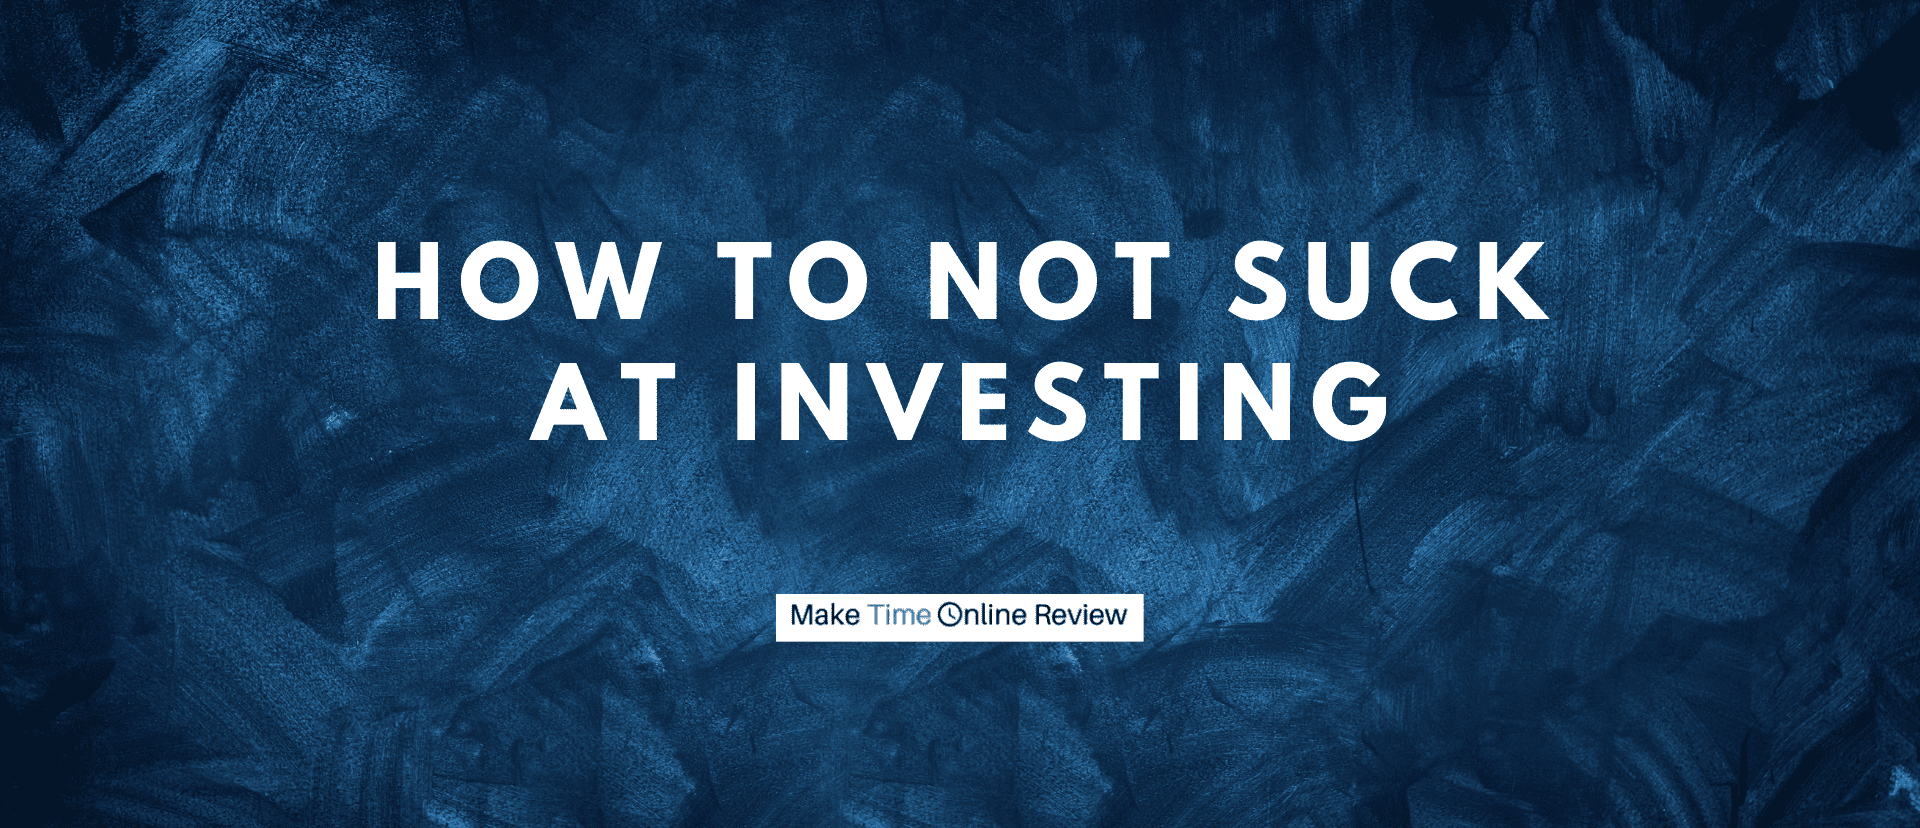 How to Not Suck at Investing